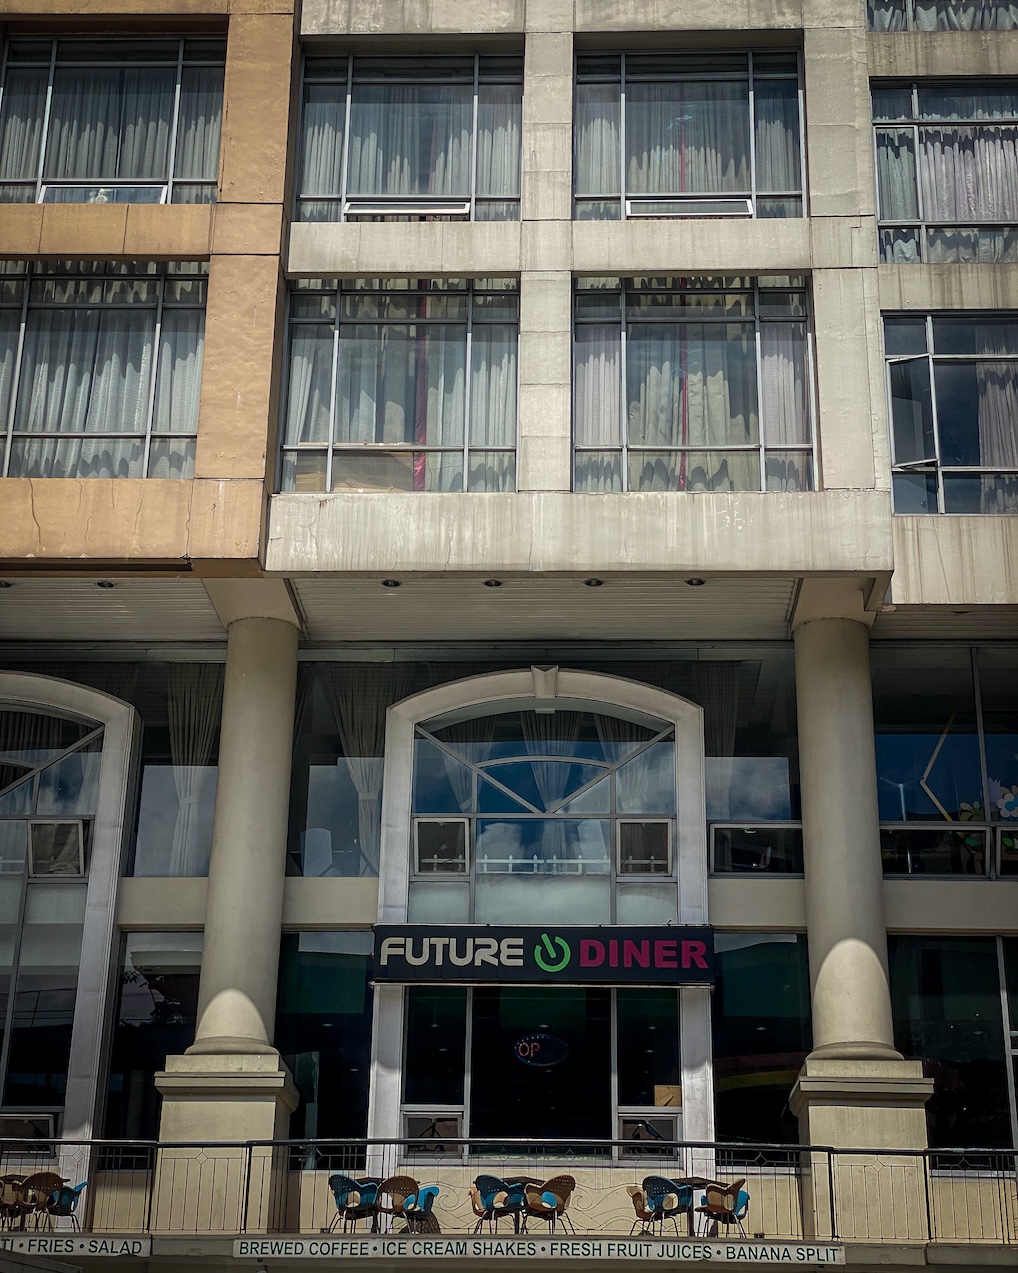 Future Diner, a wide restaurant at the base of a tall building